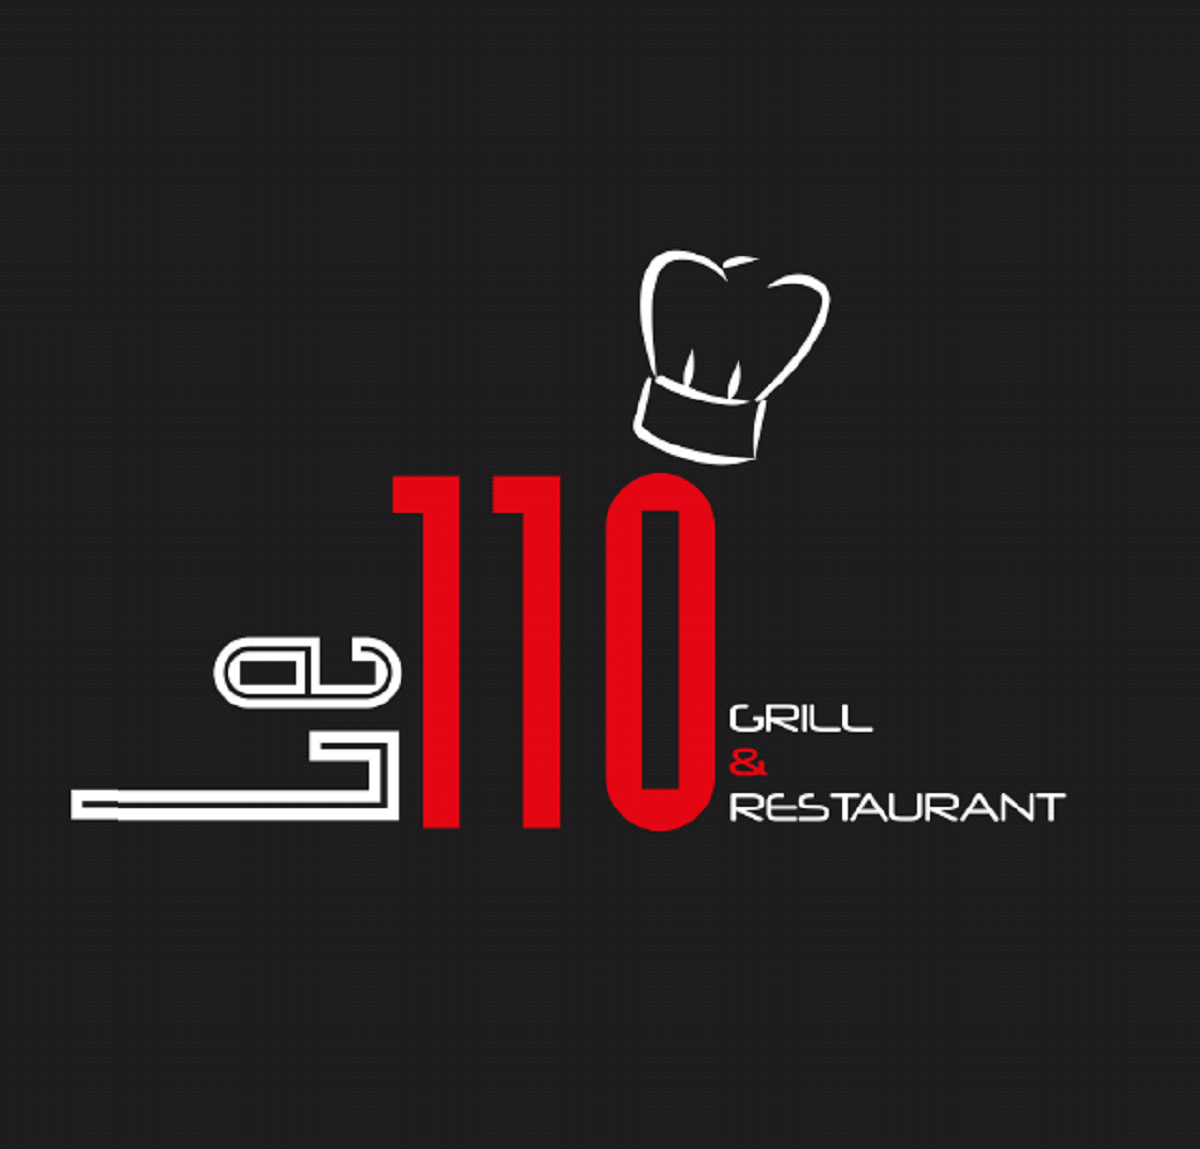 LE 110 RESTAURANT & GRILL©